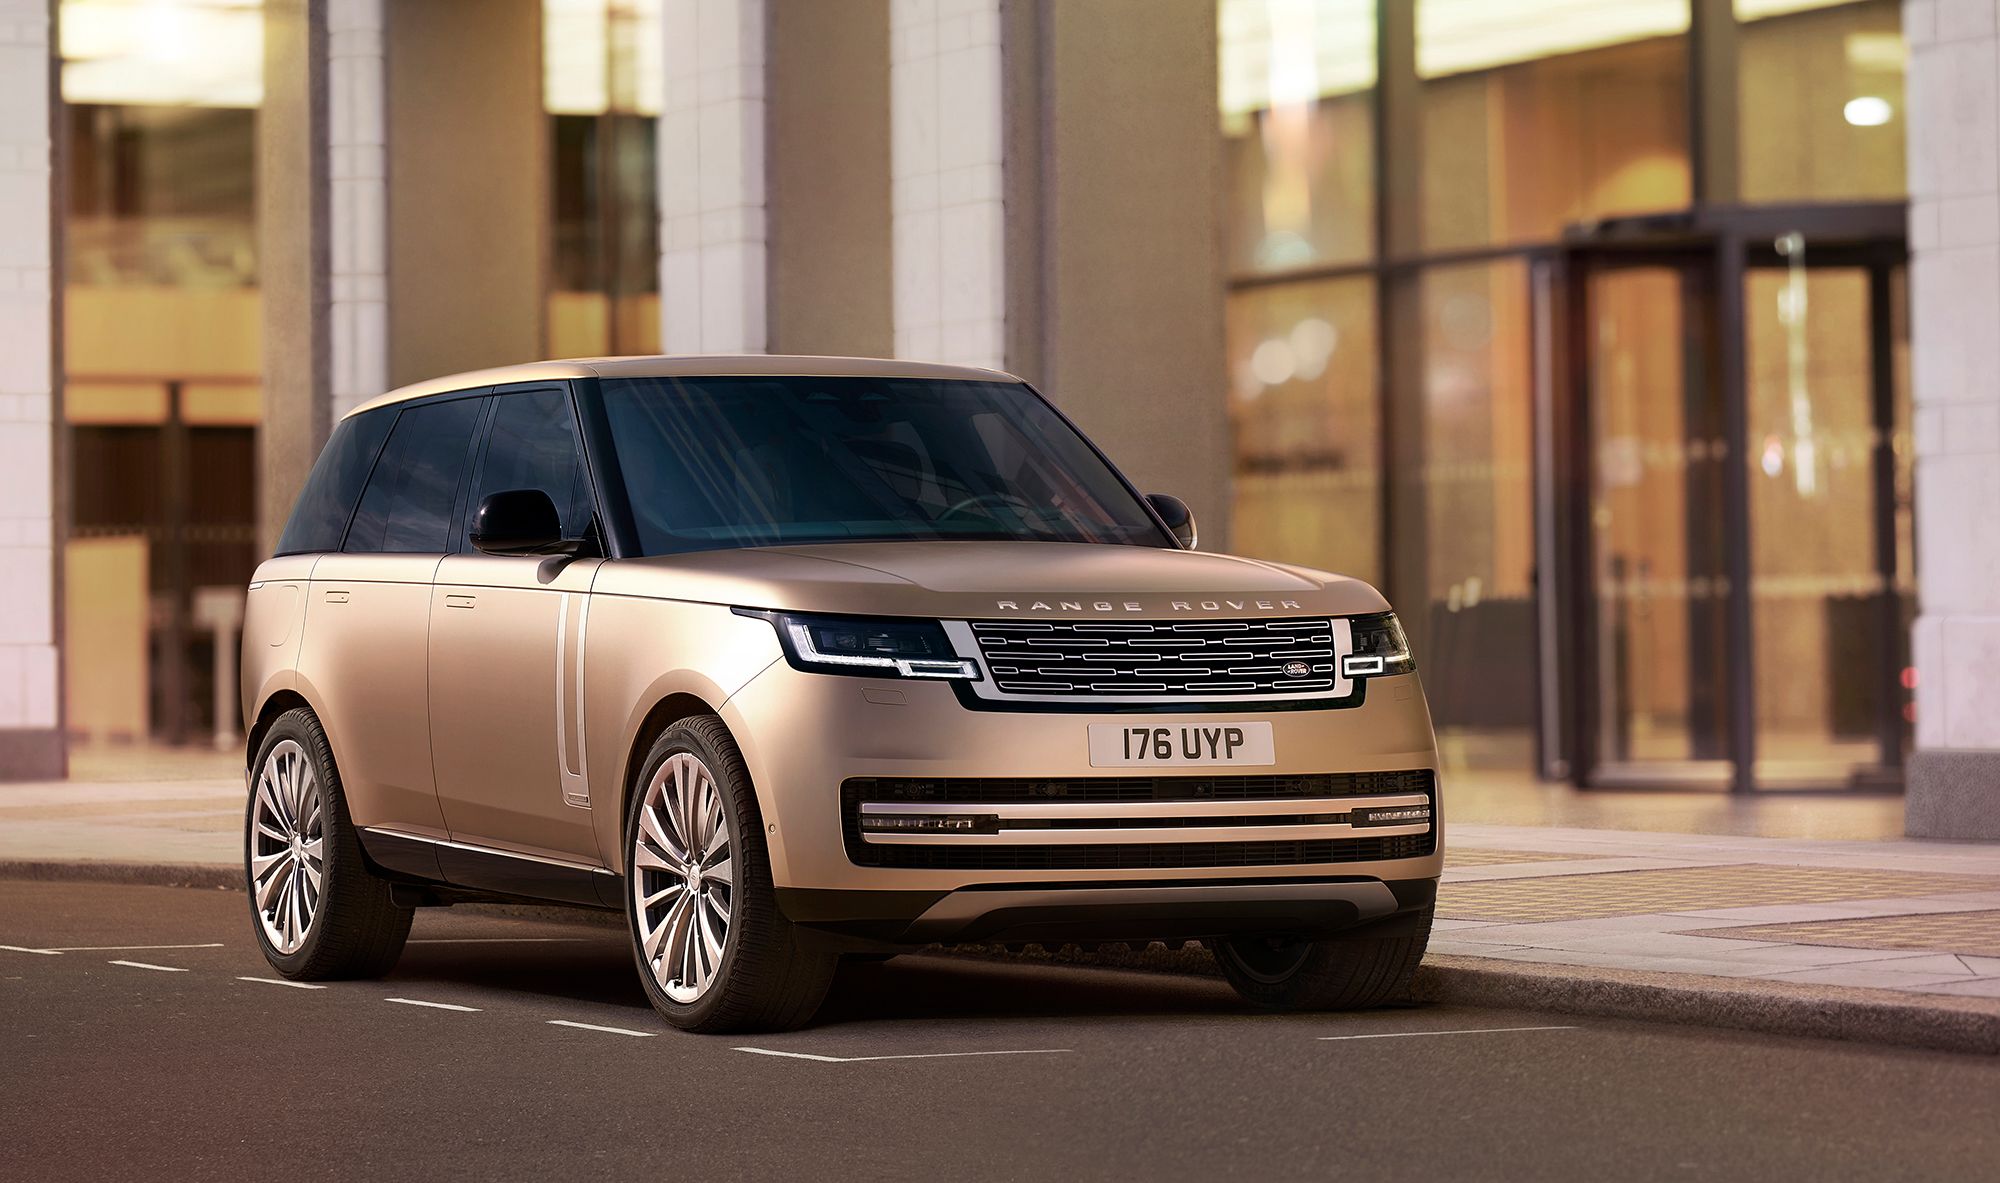 The first new Range Rover in a decade faces tougher competition